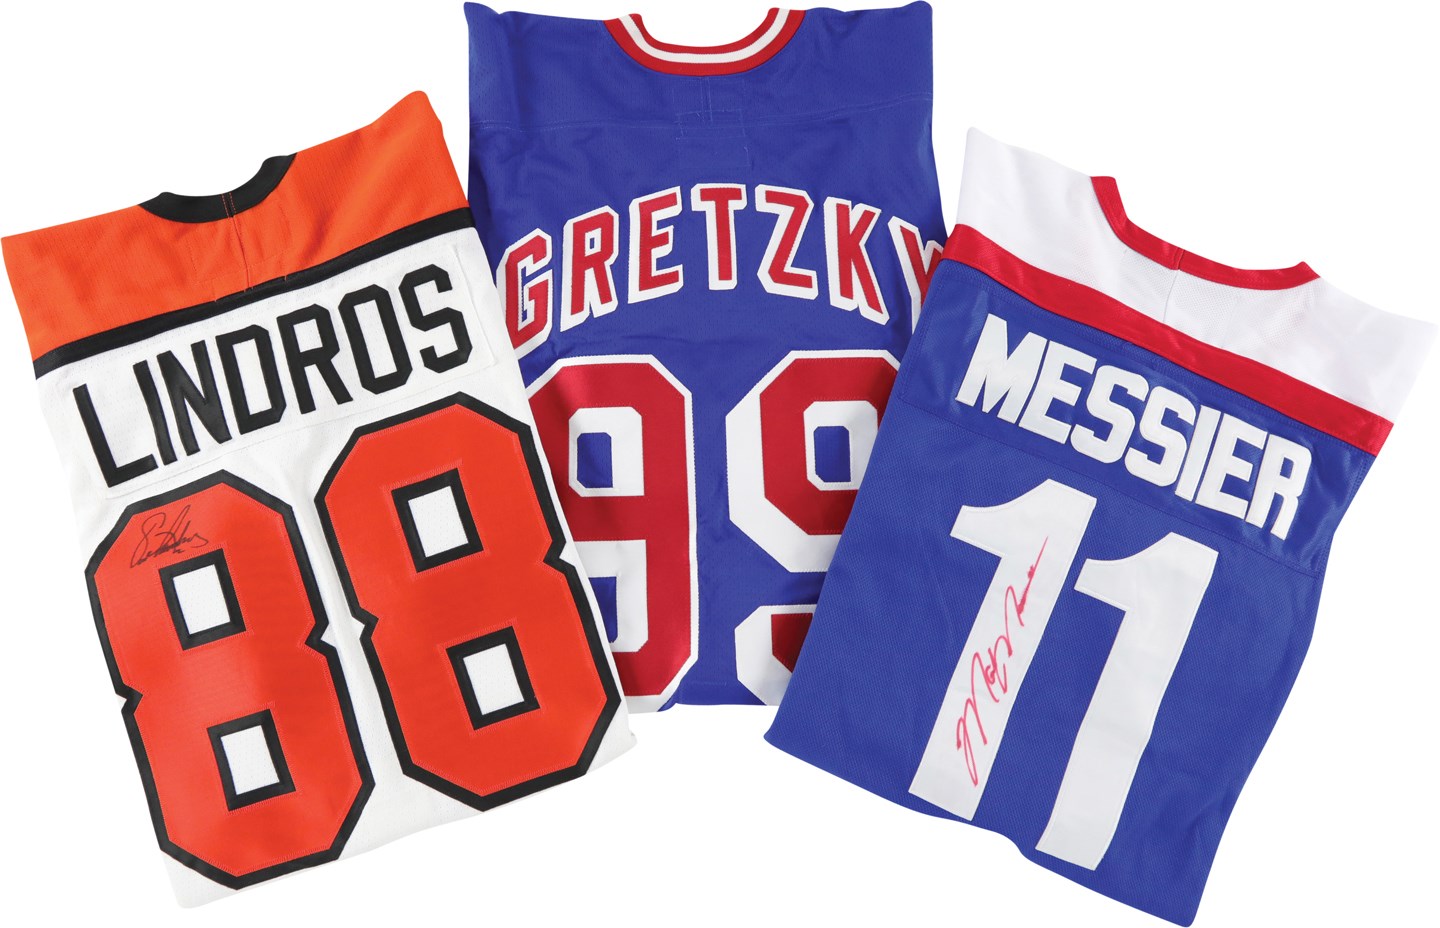 - Hockey Jerseys - Gretzky Rangers Pro Model, Messier Signed Jersey, and Lindros Signed Jersey